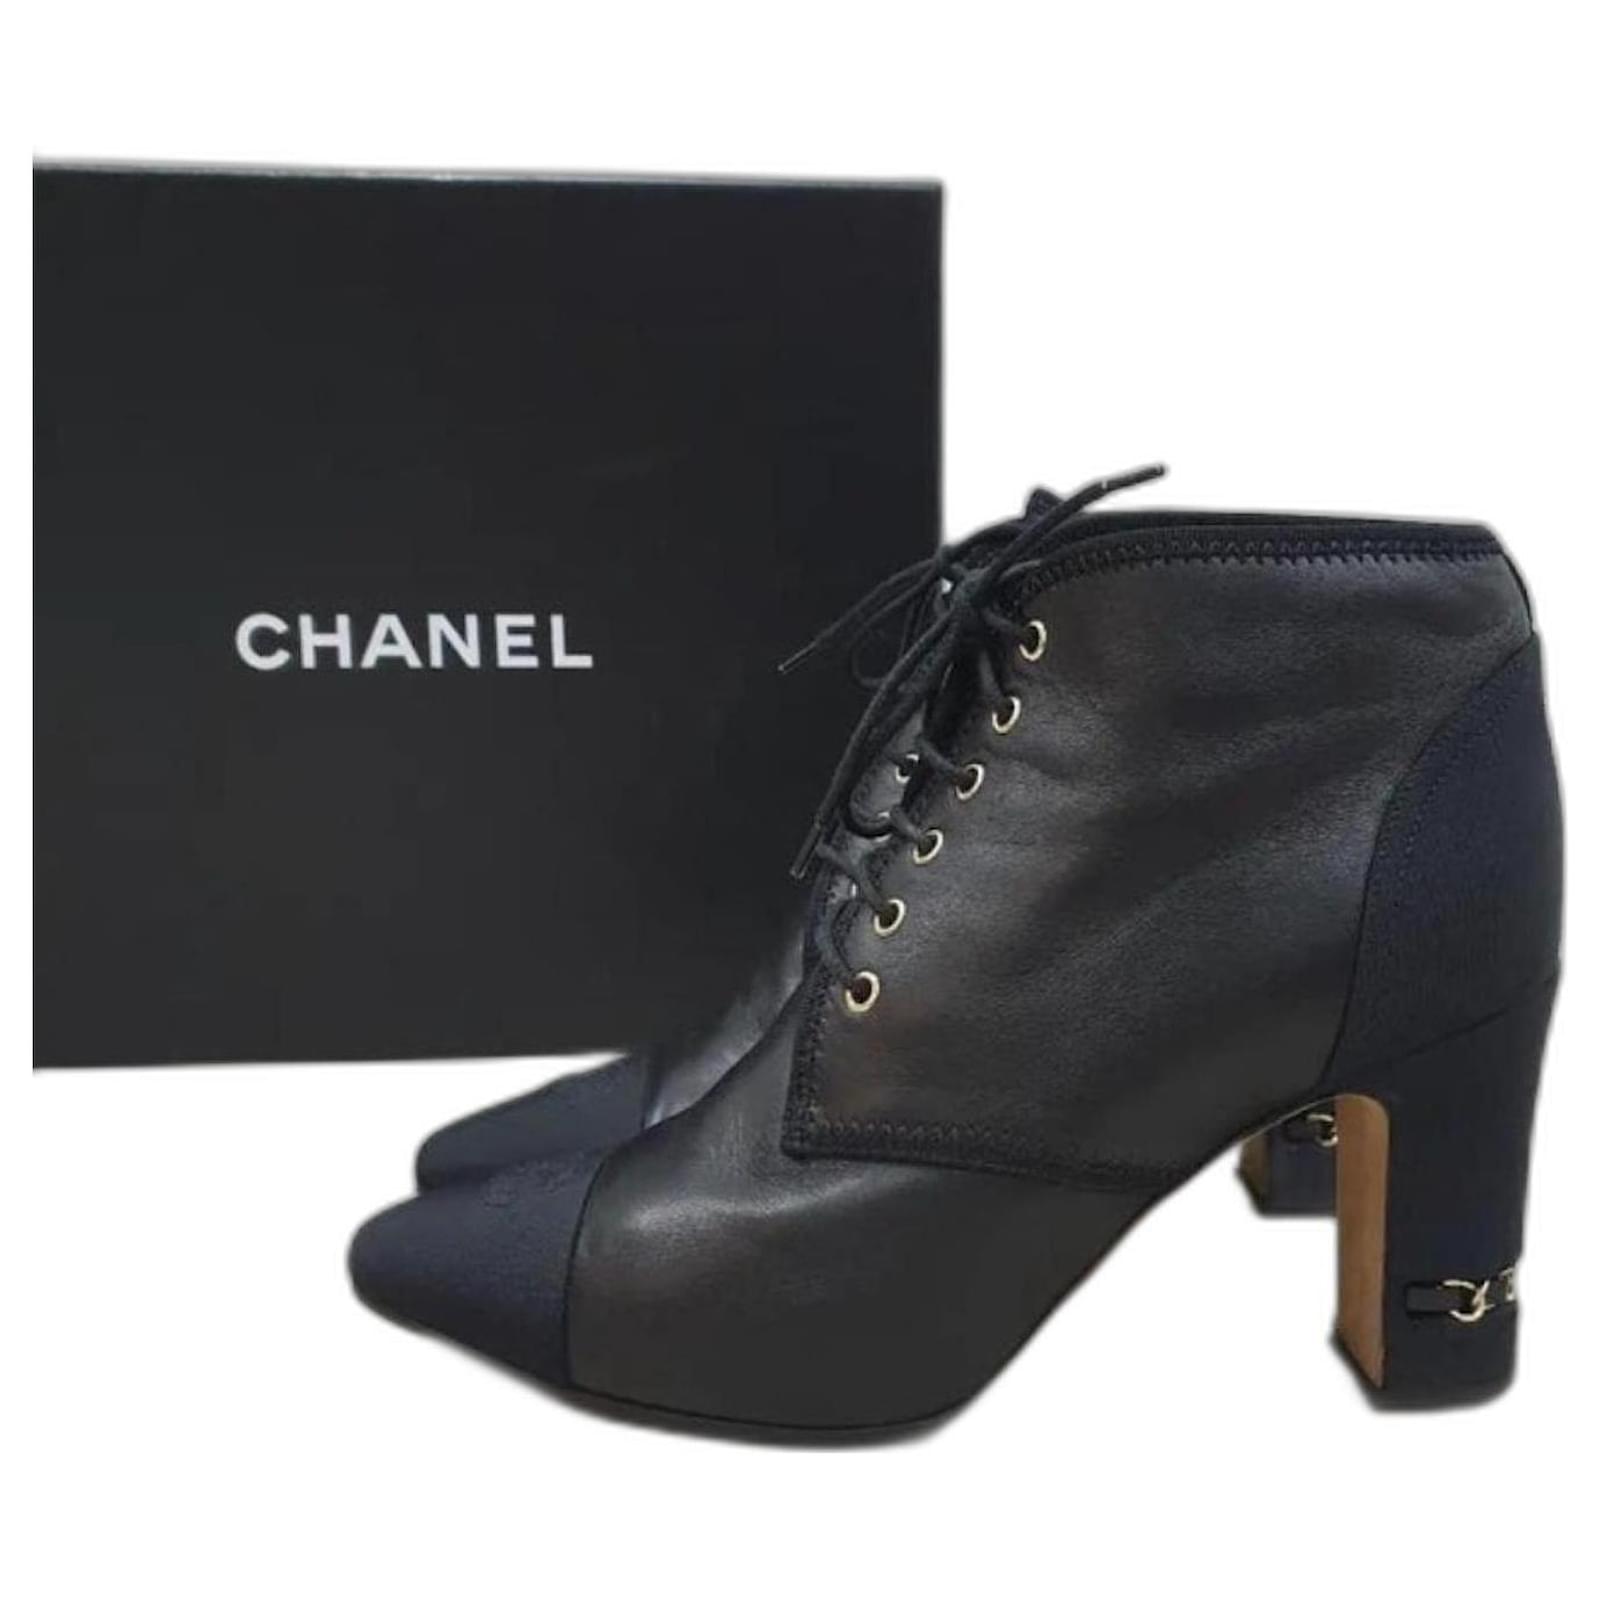 CHANEL PARIS-SALZBURG IVORY Leather Quilted Gold Heel Ankle Boots 37.5  $425.00 - PicClick